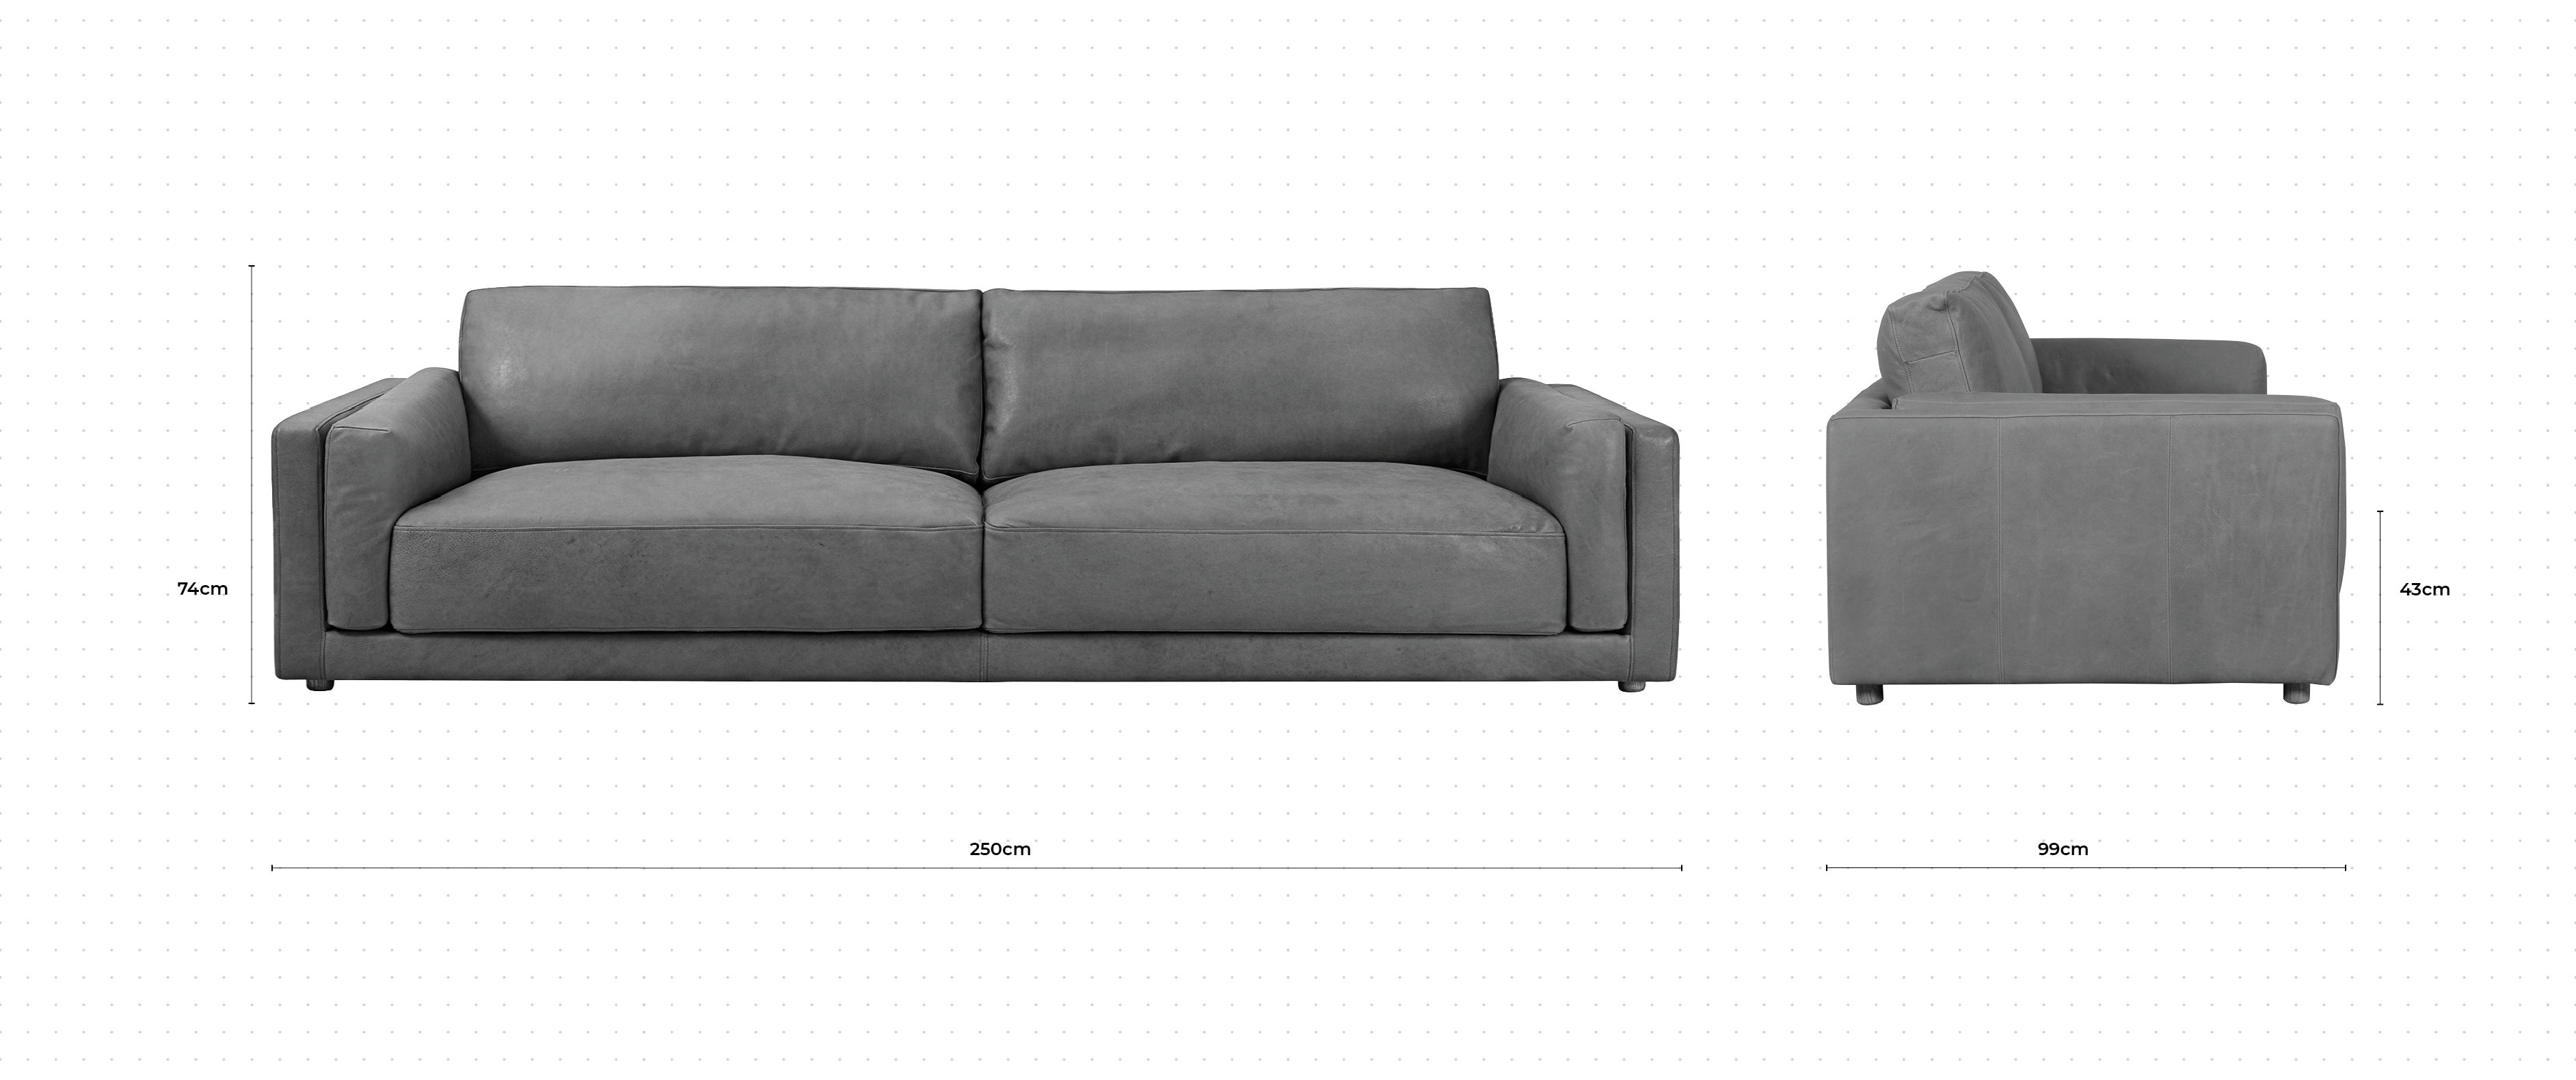 Butter 3 Seater Sofa dimensions